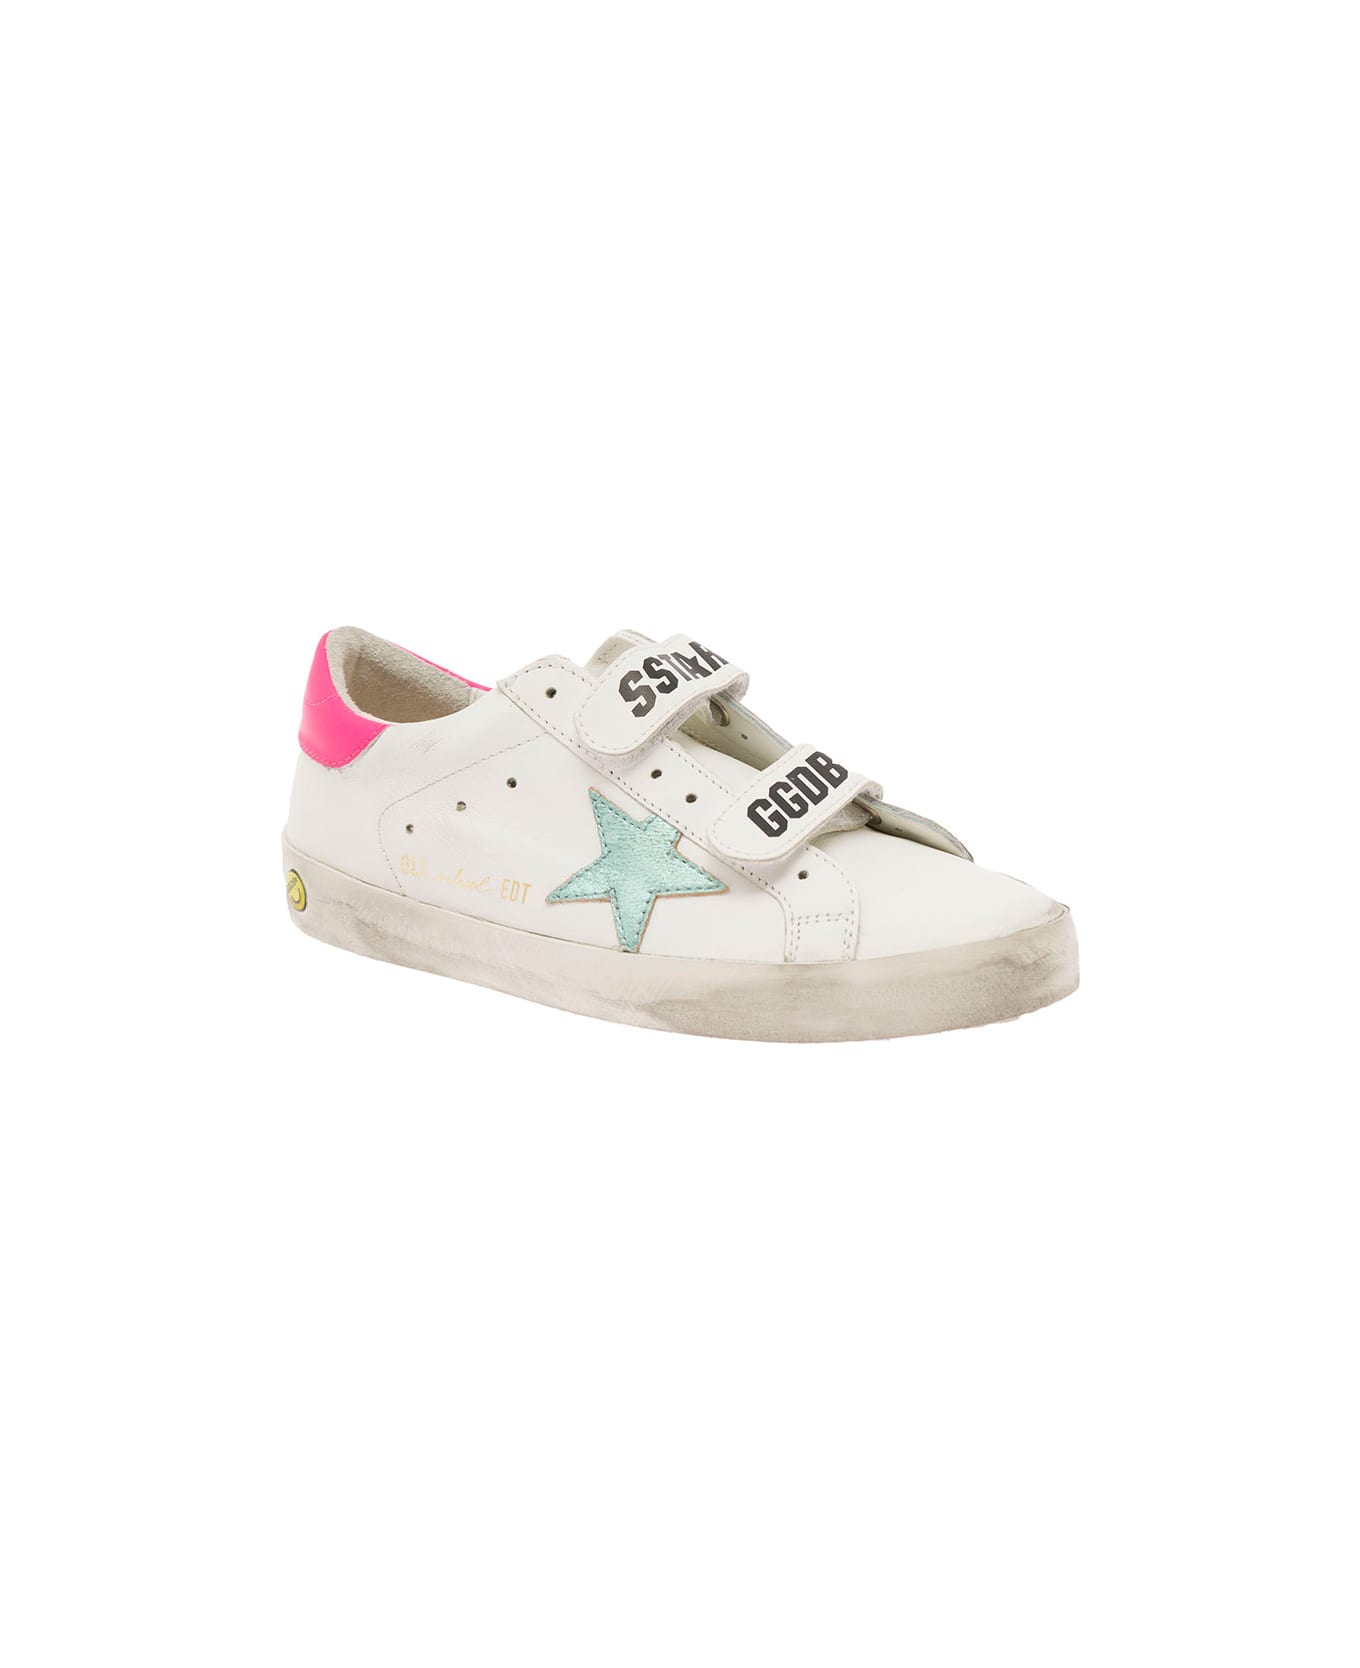 Golden Goose Old School Whtie Leather Sneakers With Logo Golden Goose Girl - White